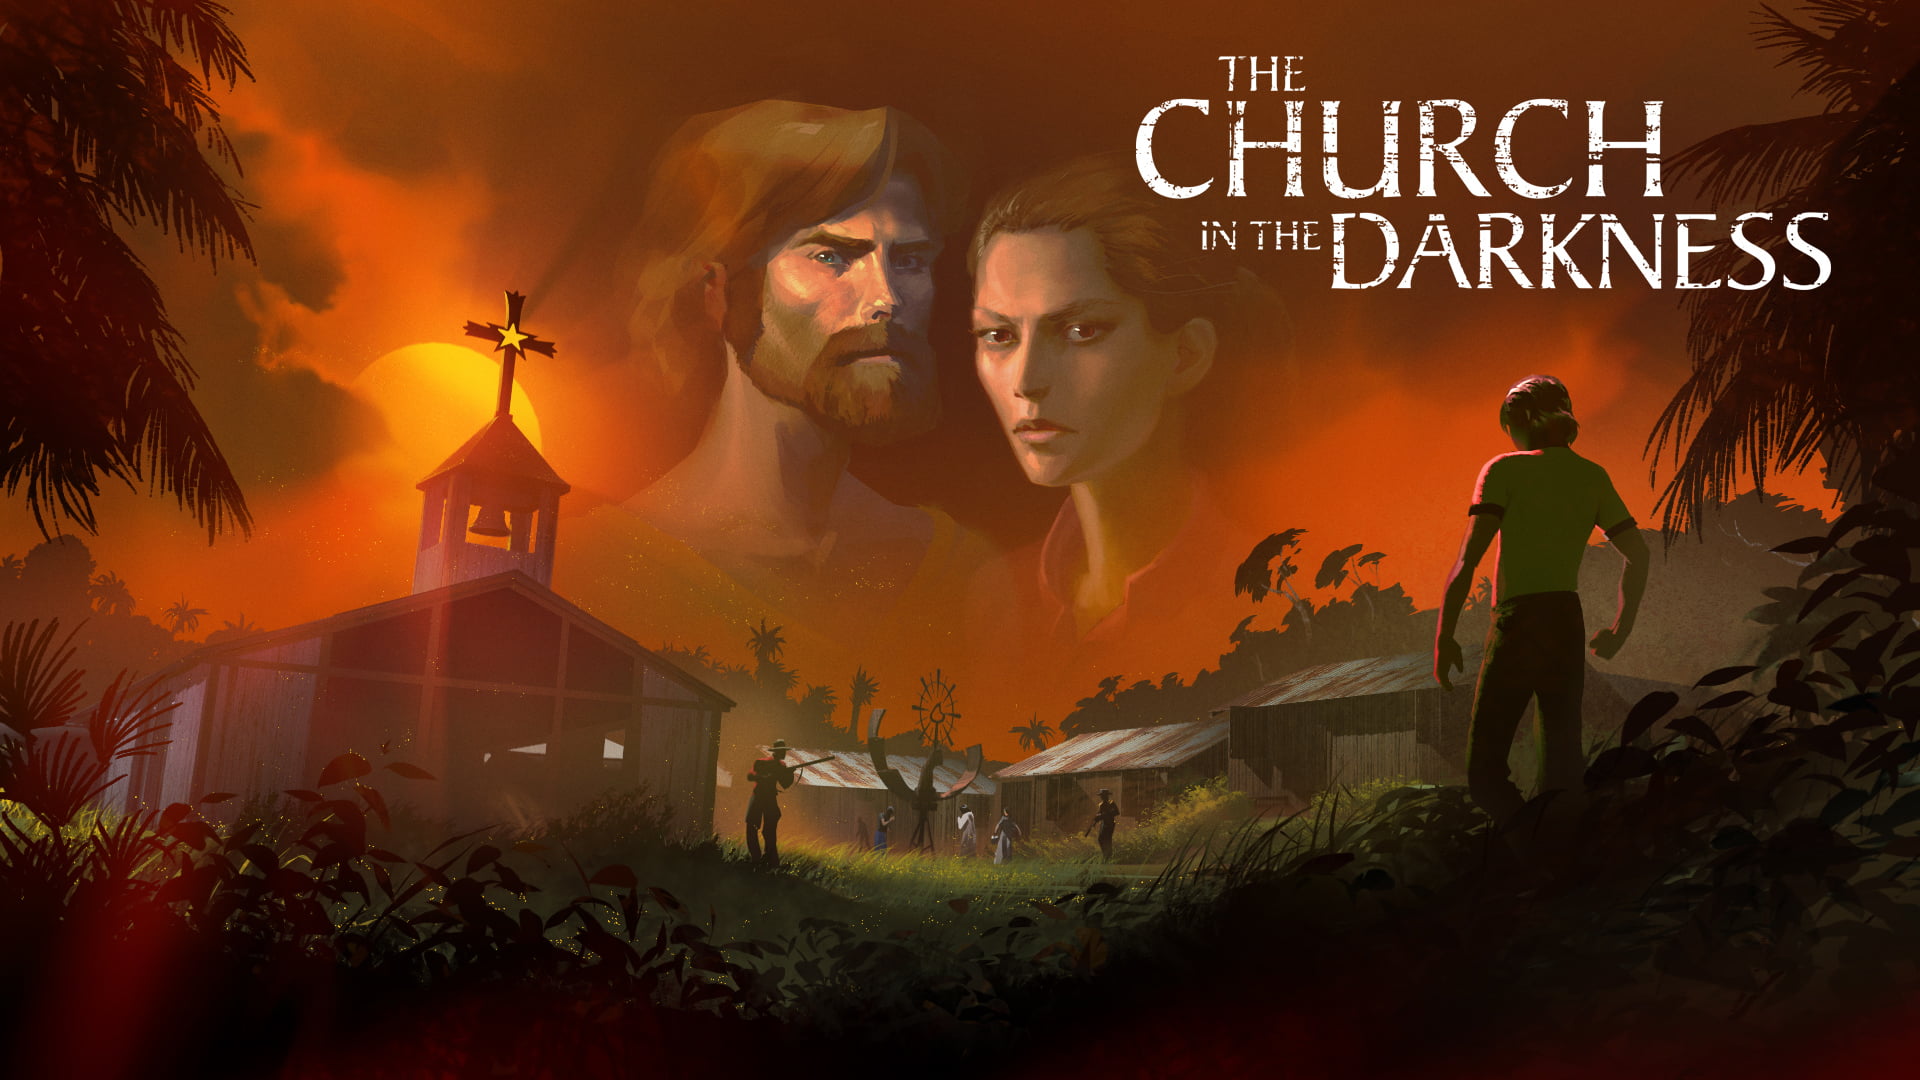 The church in the darkness - review | the church in the darkness | kaze and the wild masks | the church in the darkness kaze and the wild masks